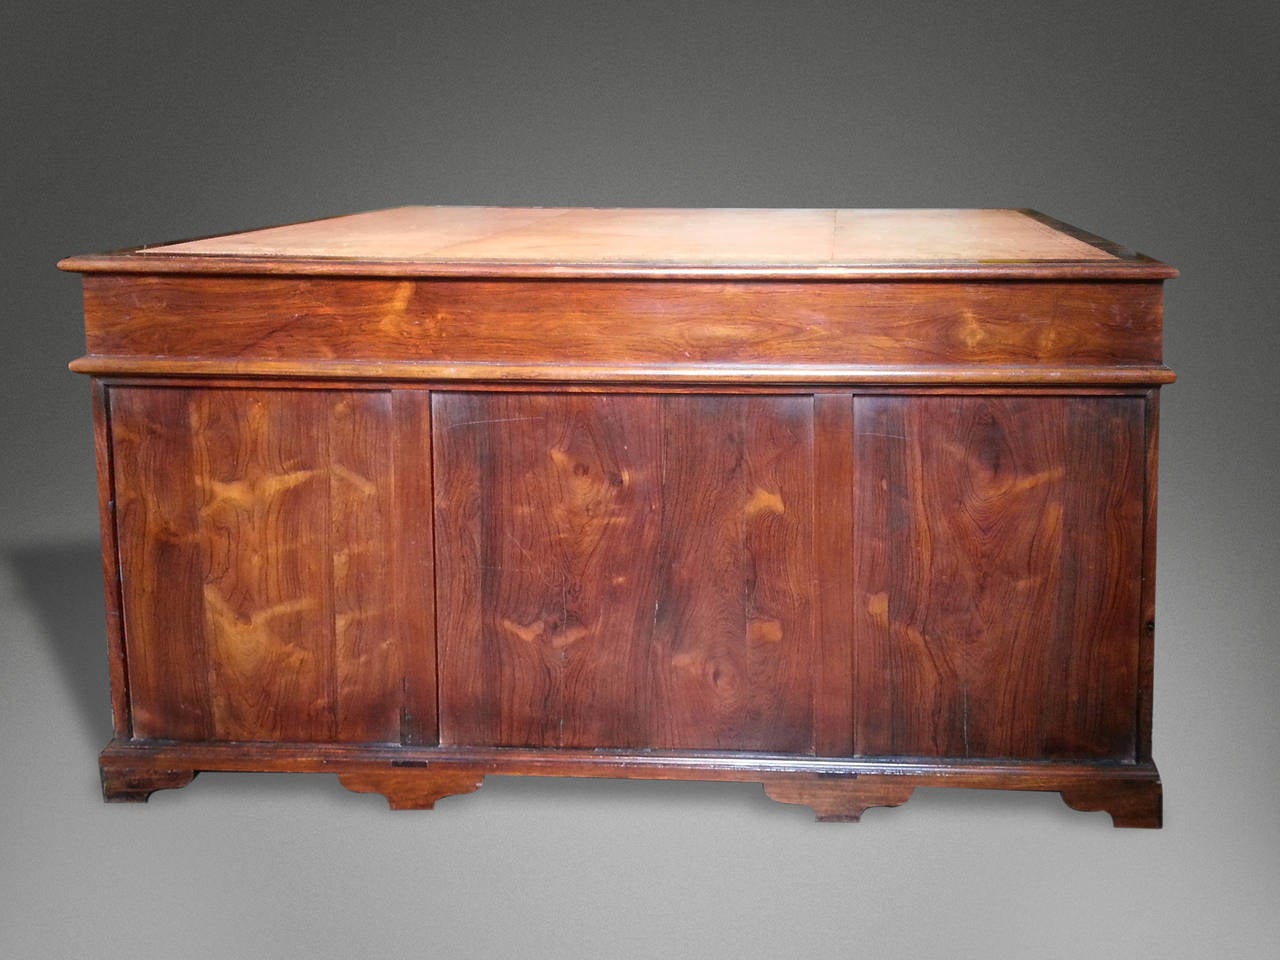 A Very Rare Mid-18th Century Huanghuali Wood Chinese Desk in the English Taste For Sale 4